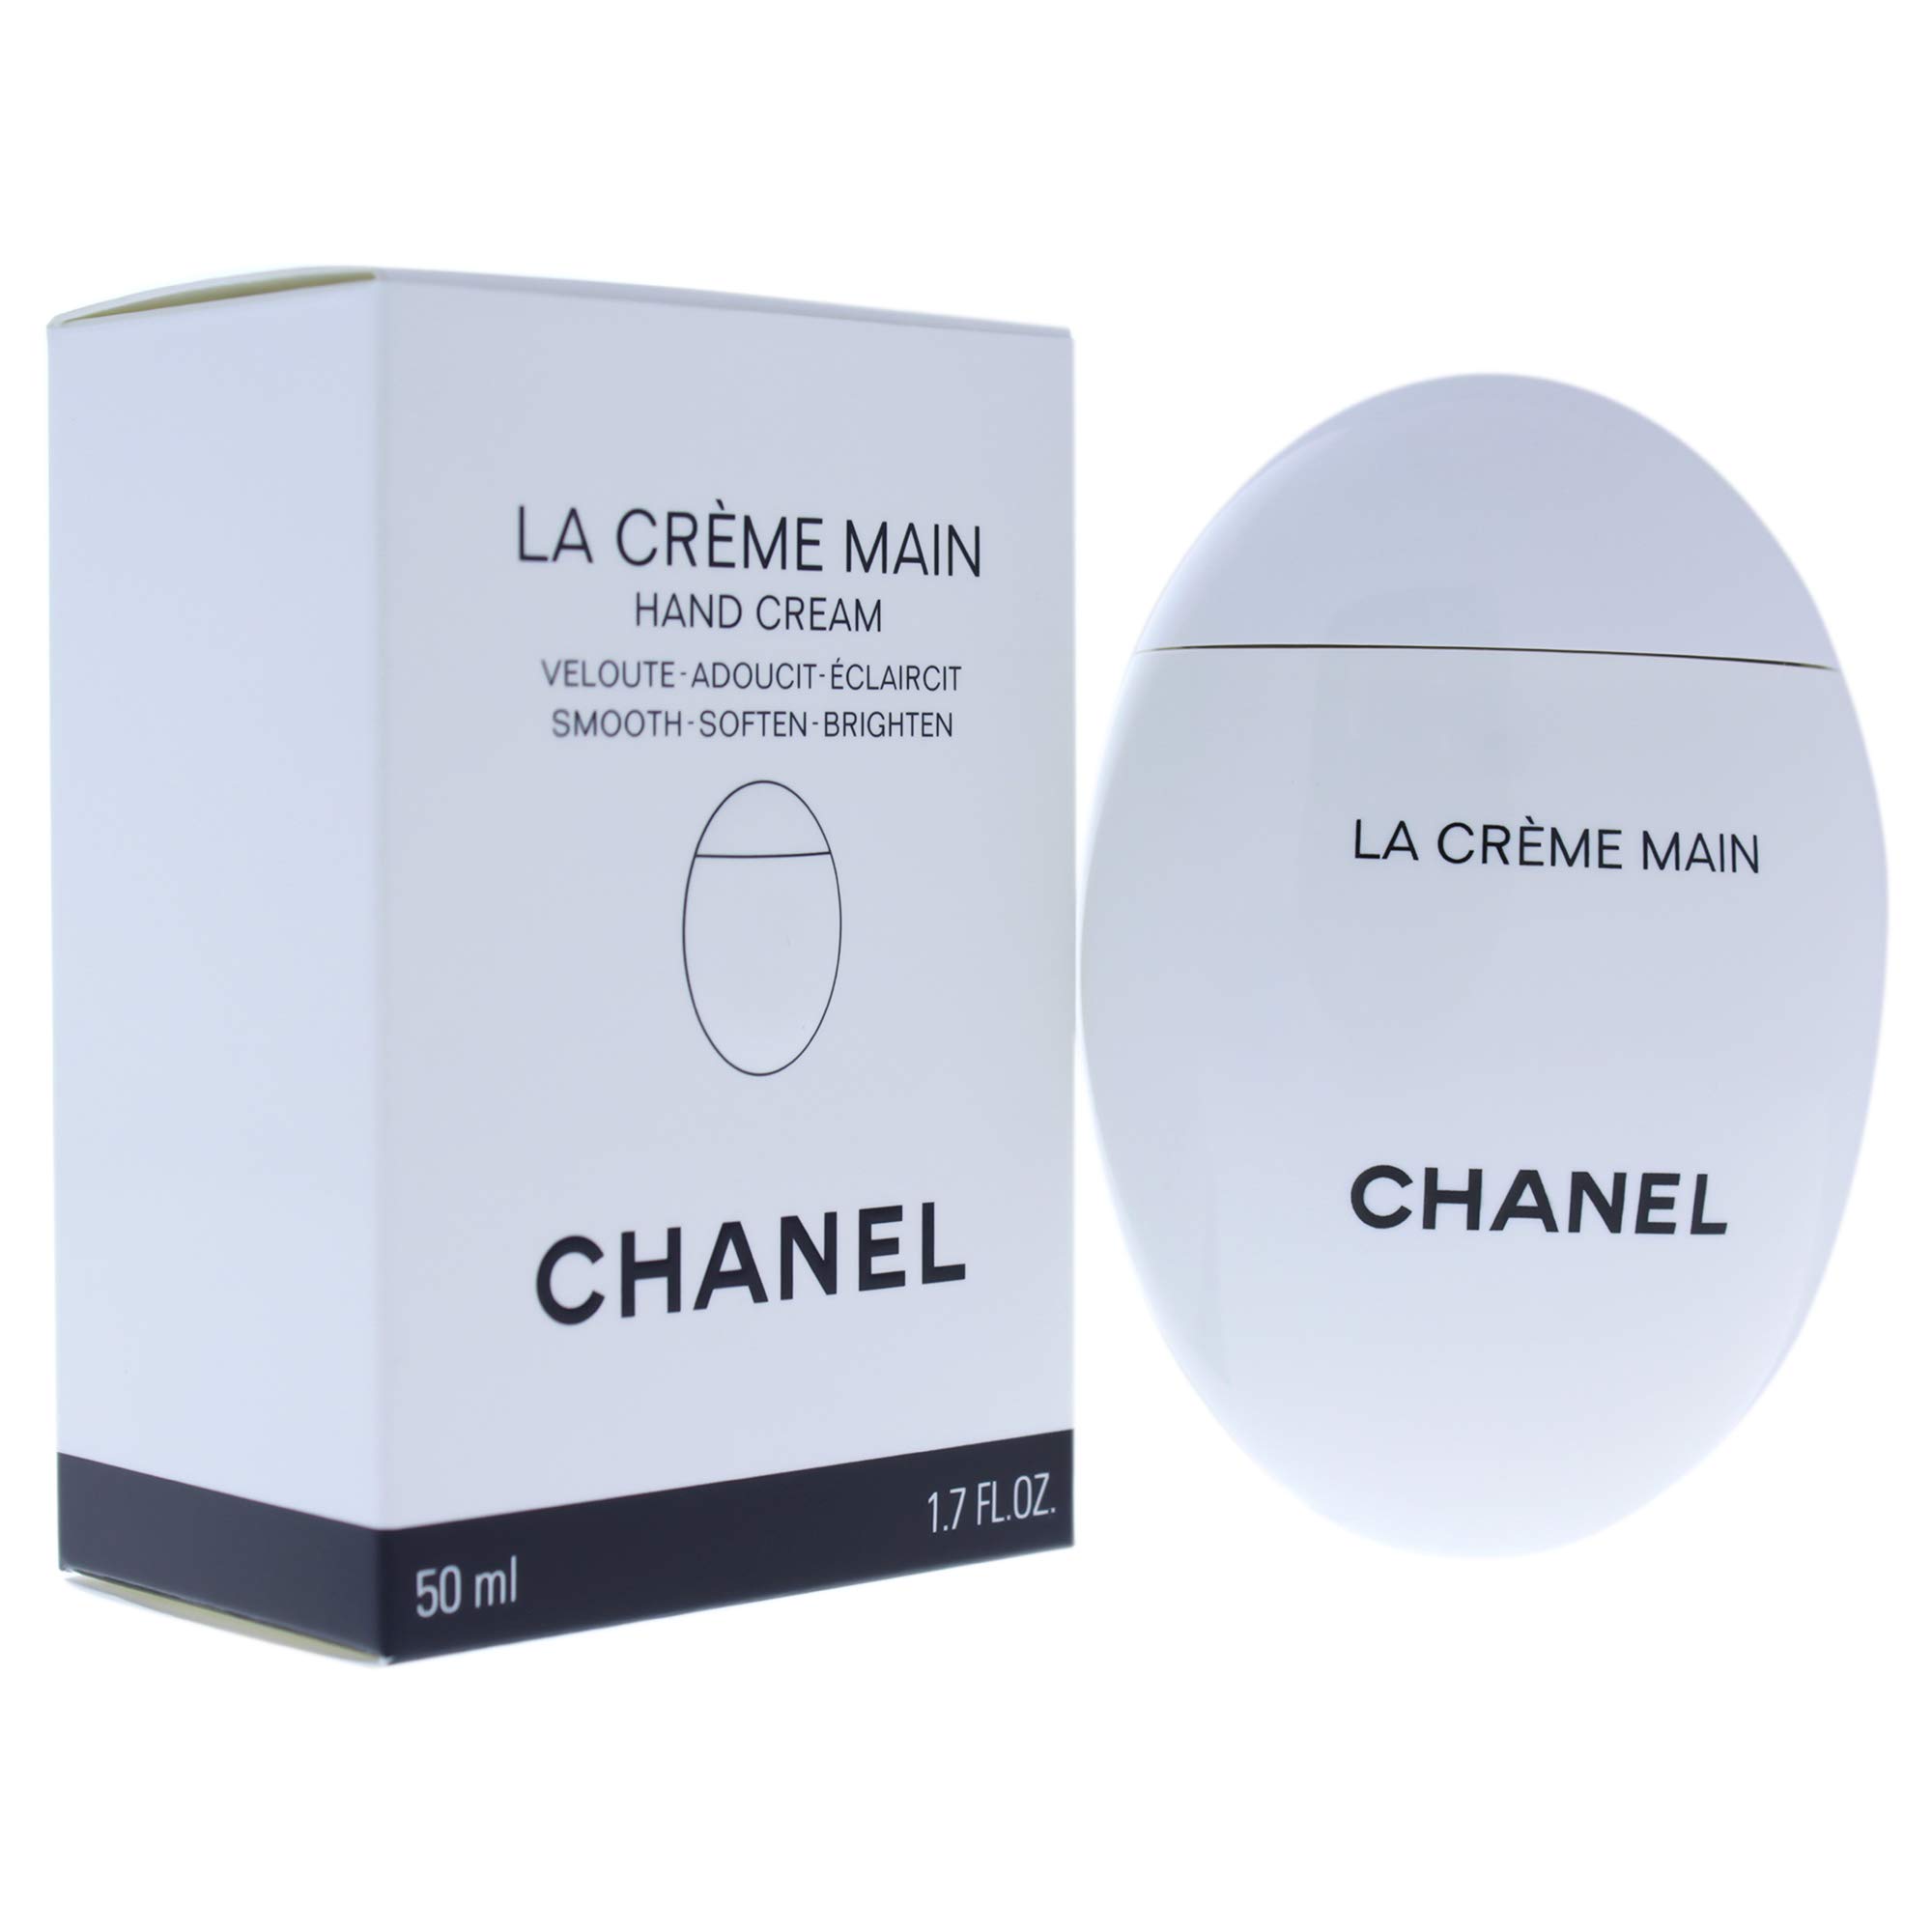 Chanel  Le Crème Main  Le Crème Main Texture Riche Review  The Happy  Sloths Beauty Makeup and Skincare Blog with Reviews and Swatches